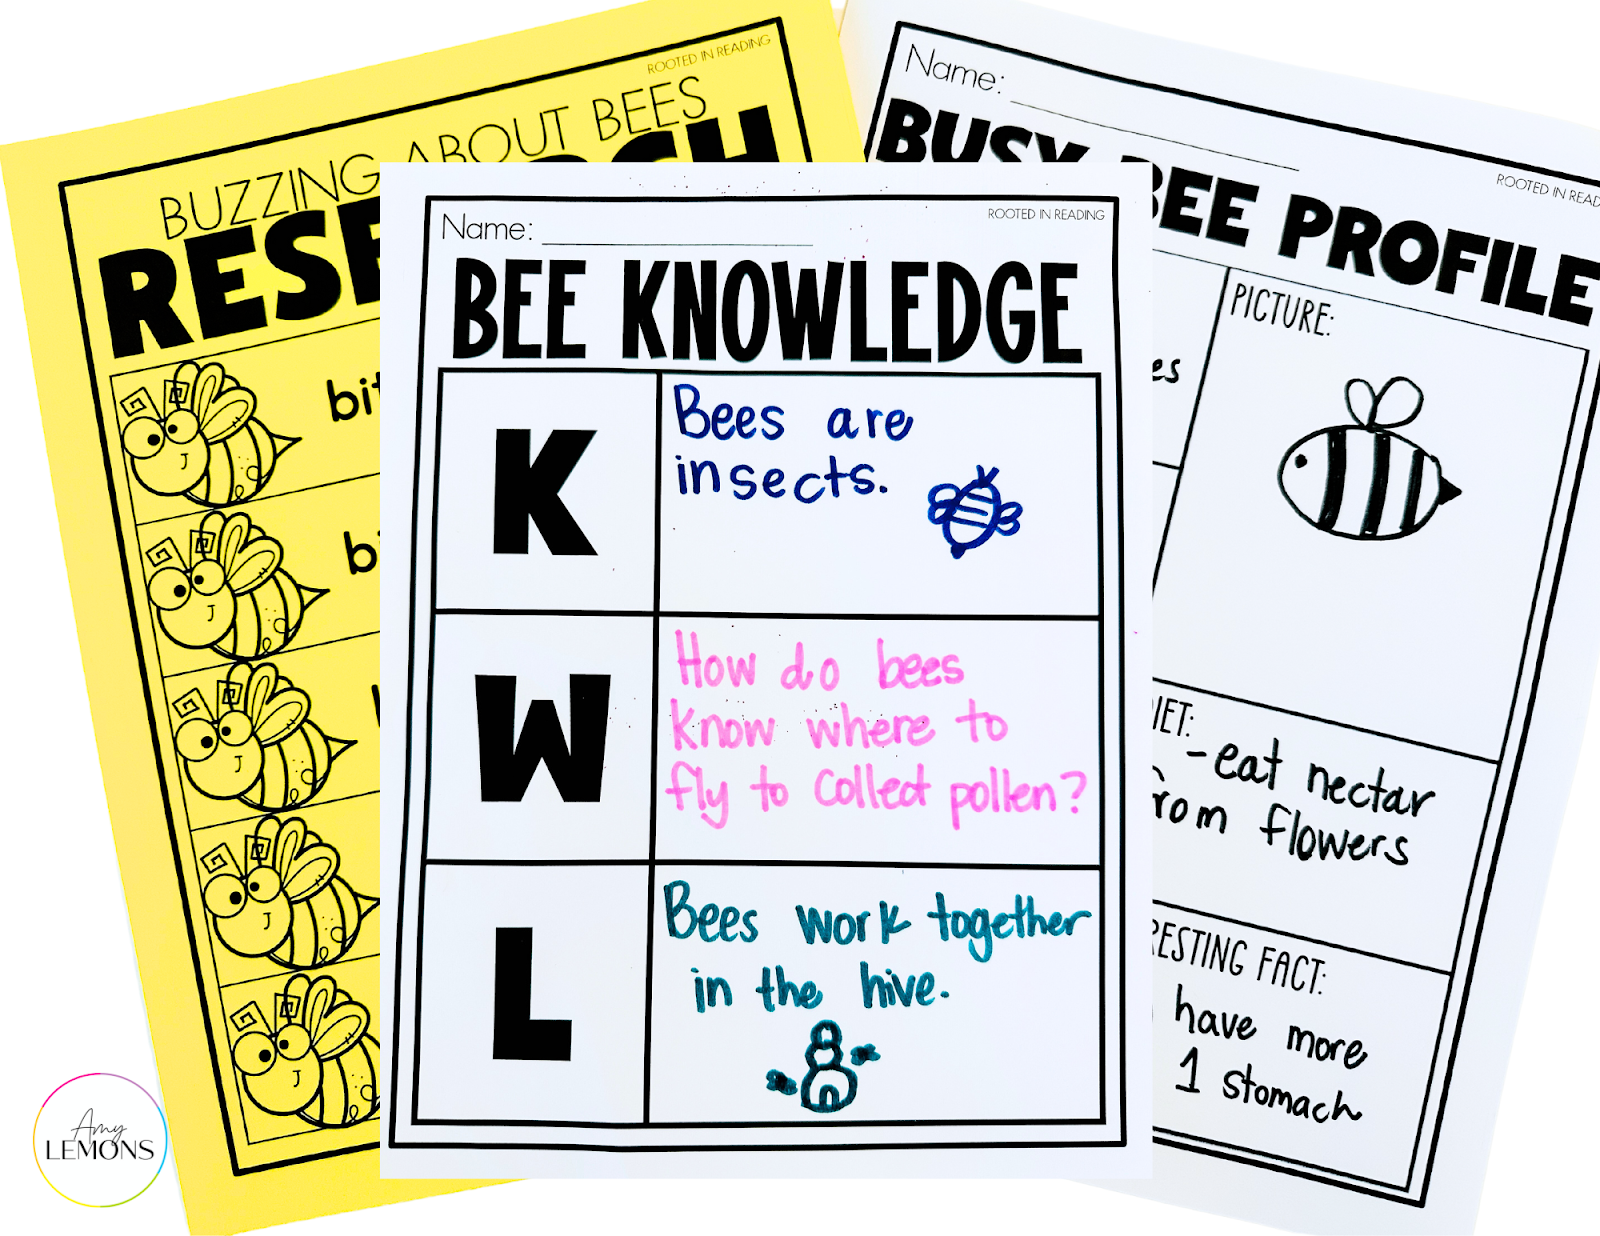 Bee knowledge graphic organizer for teaching KWL 